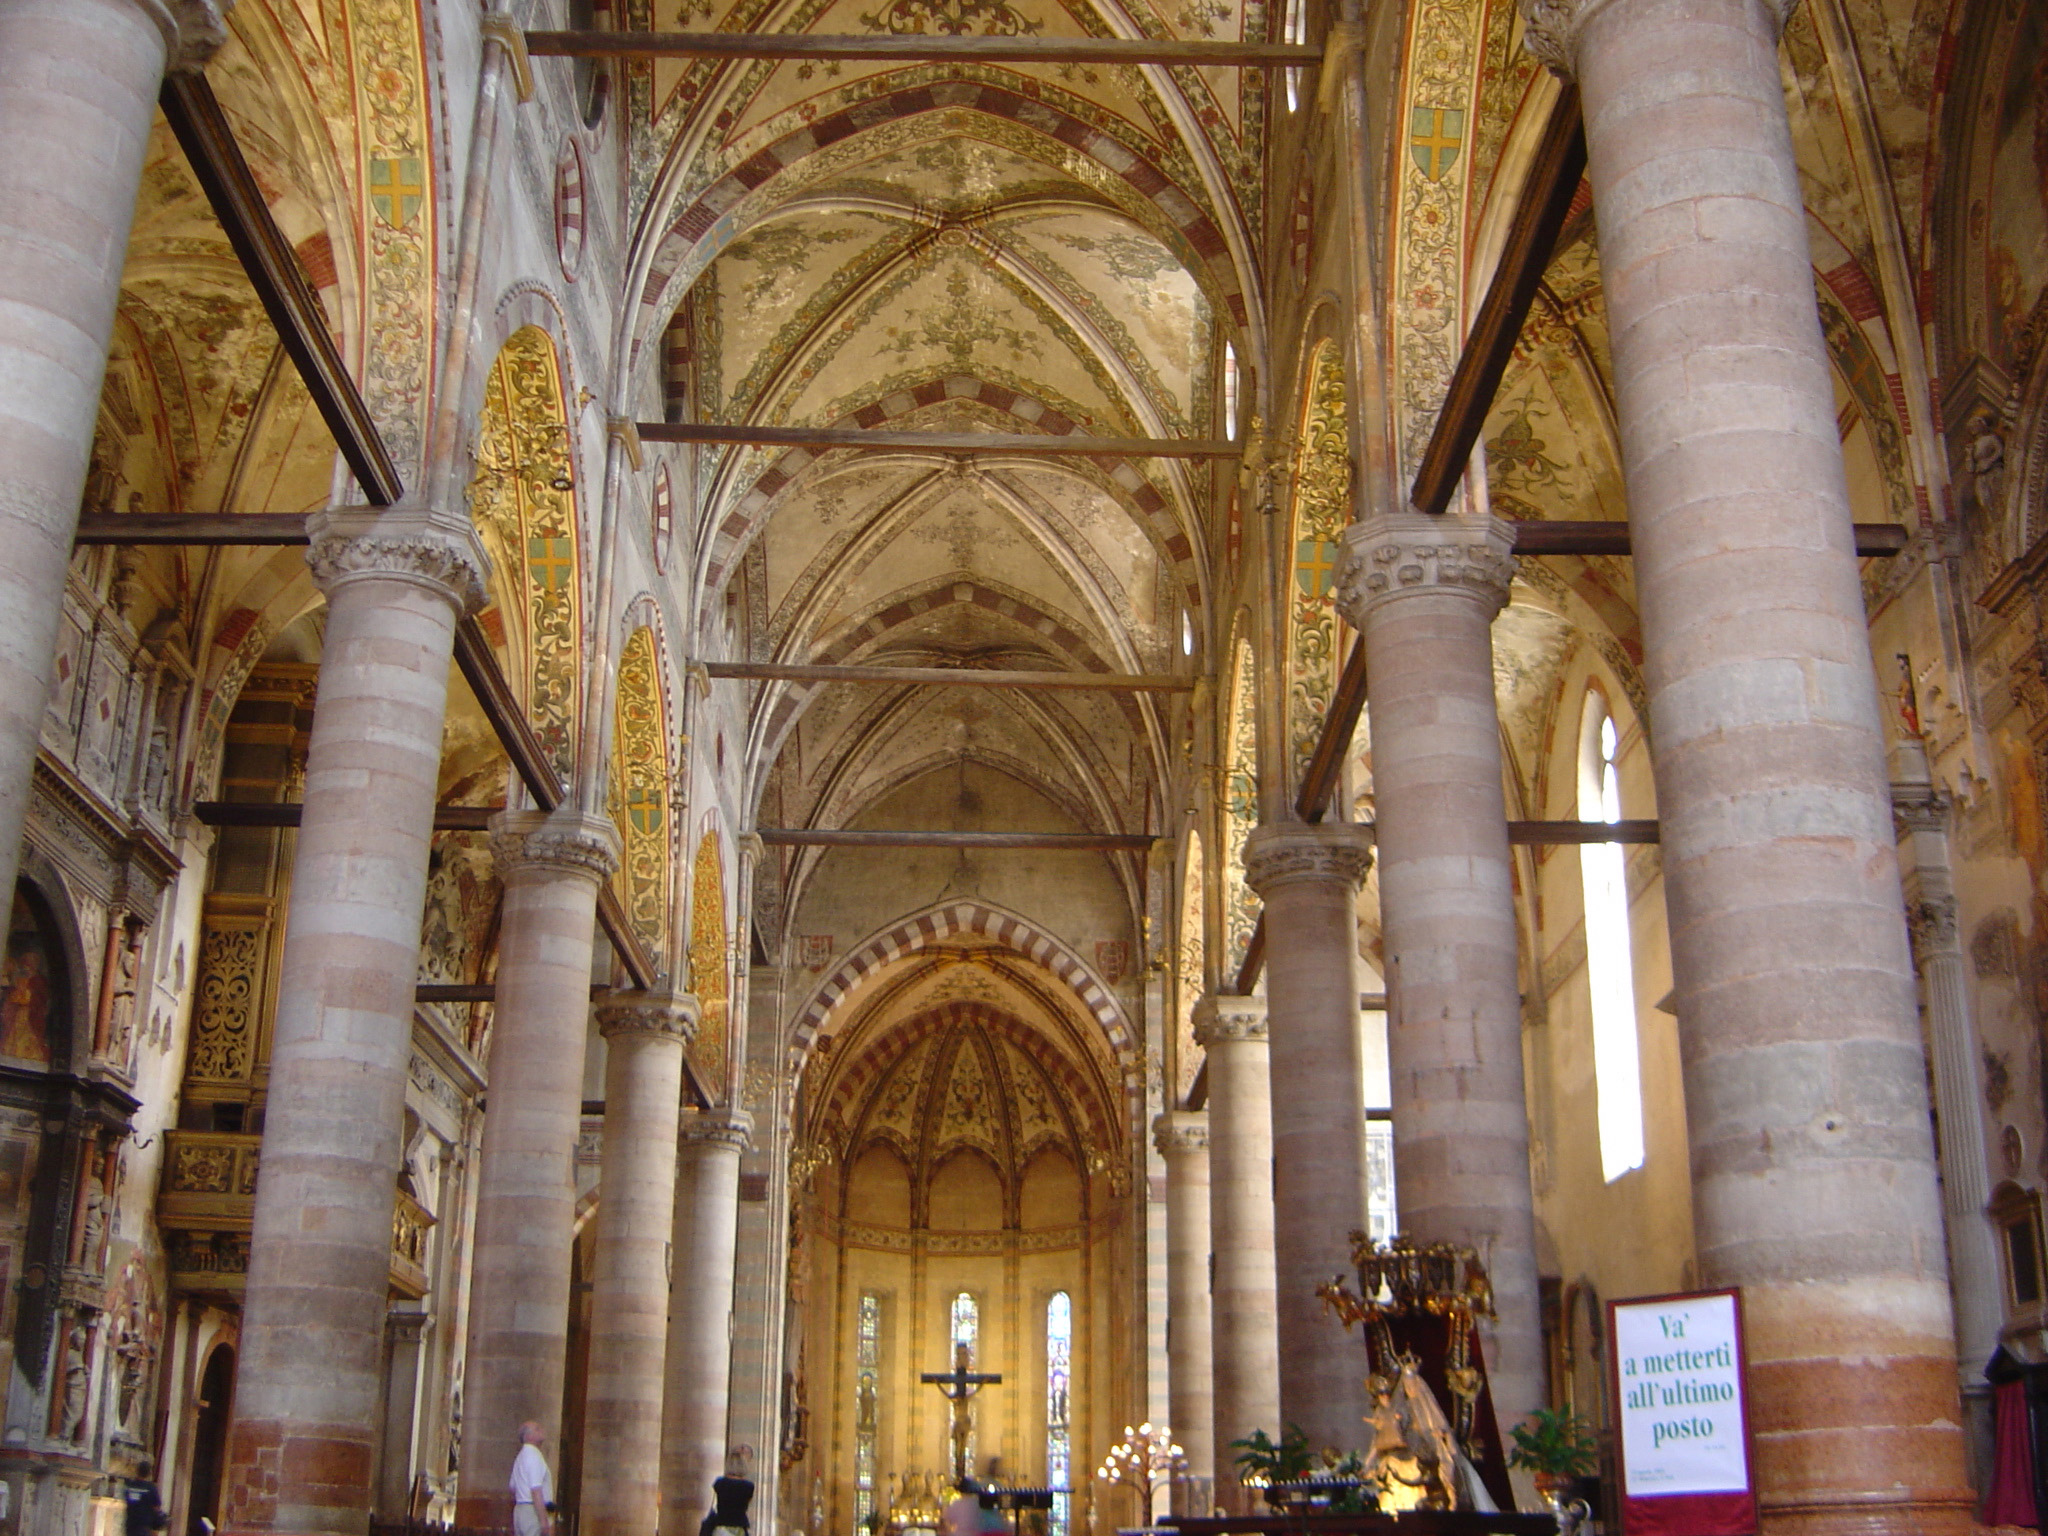 Verona, Santa Anastasia, interior For details of photograph see here and here